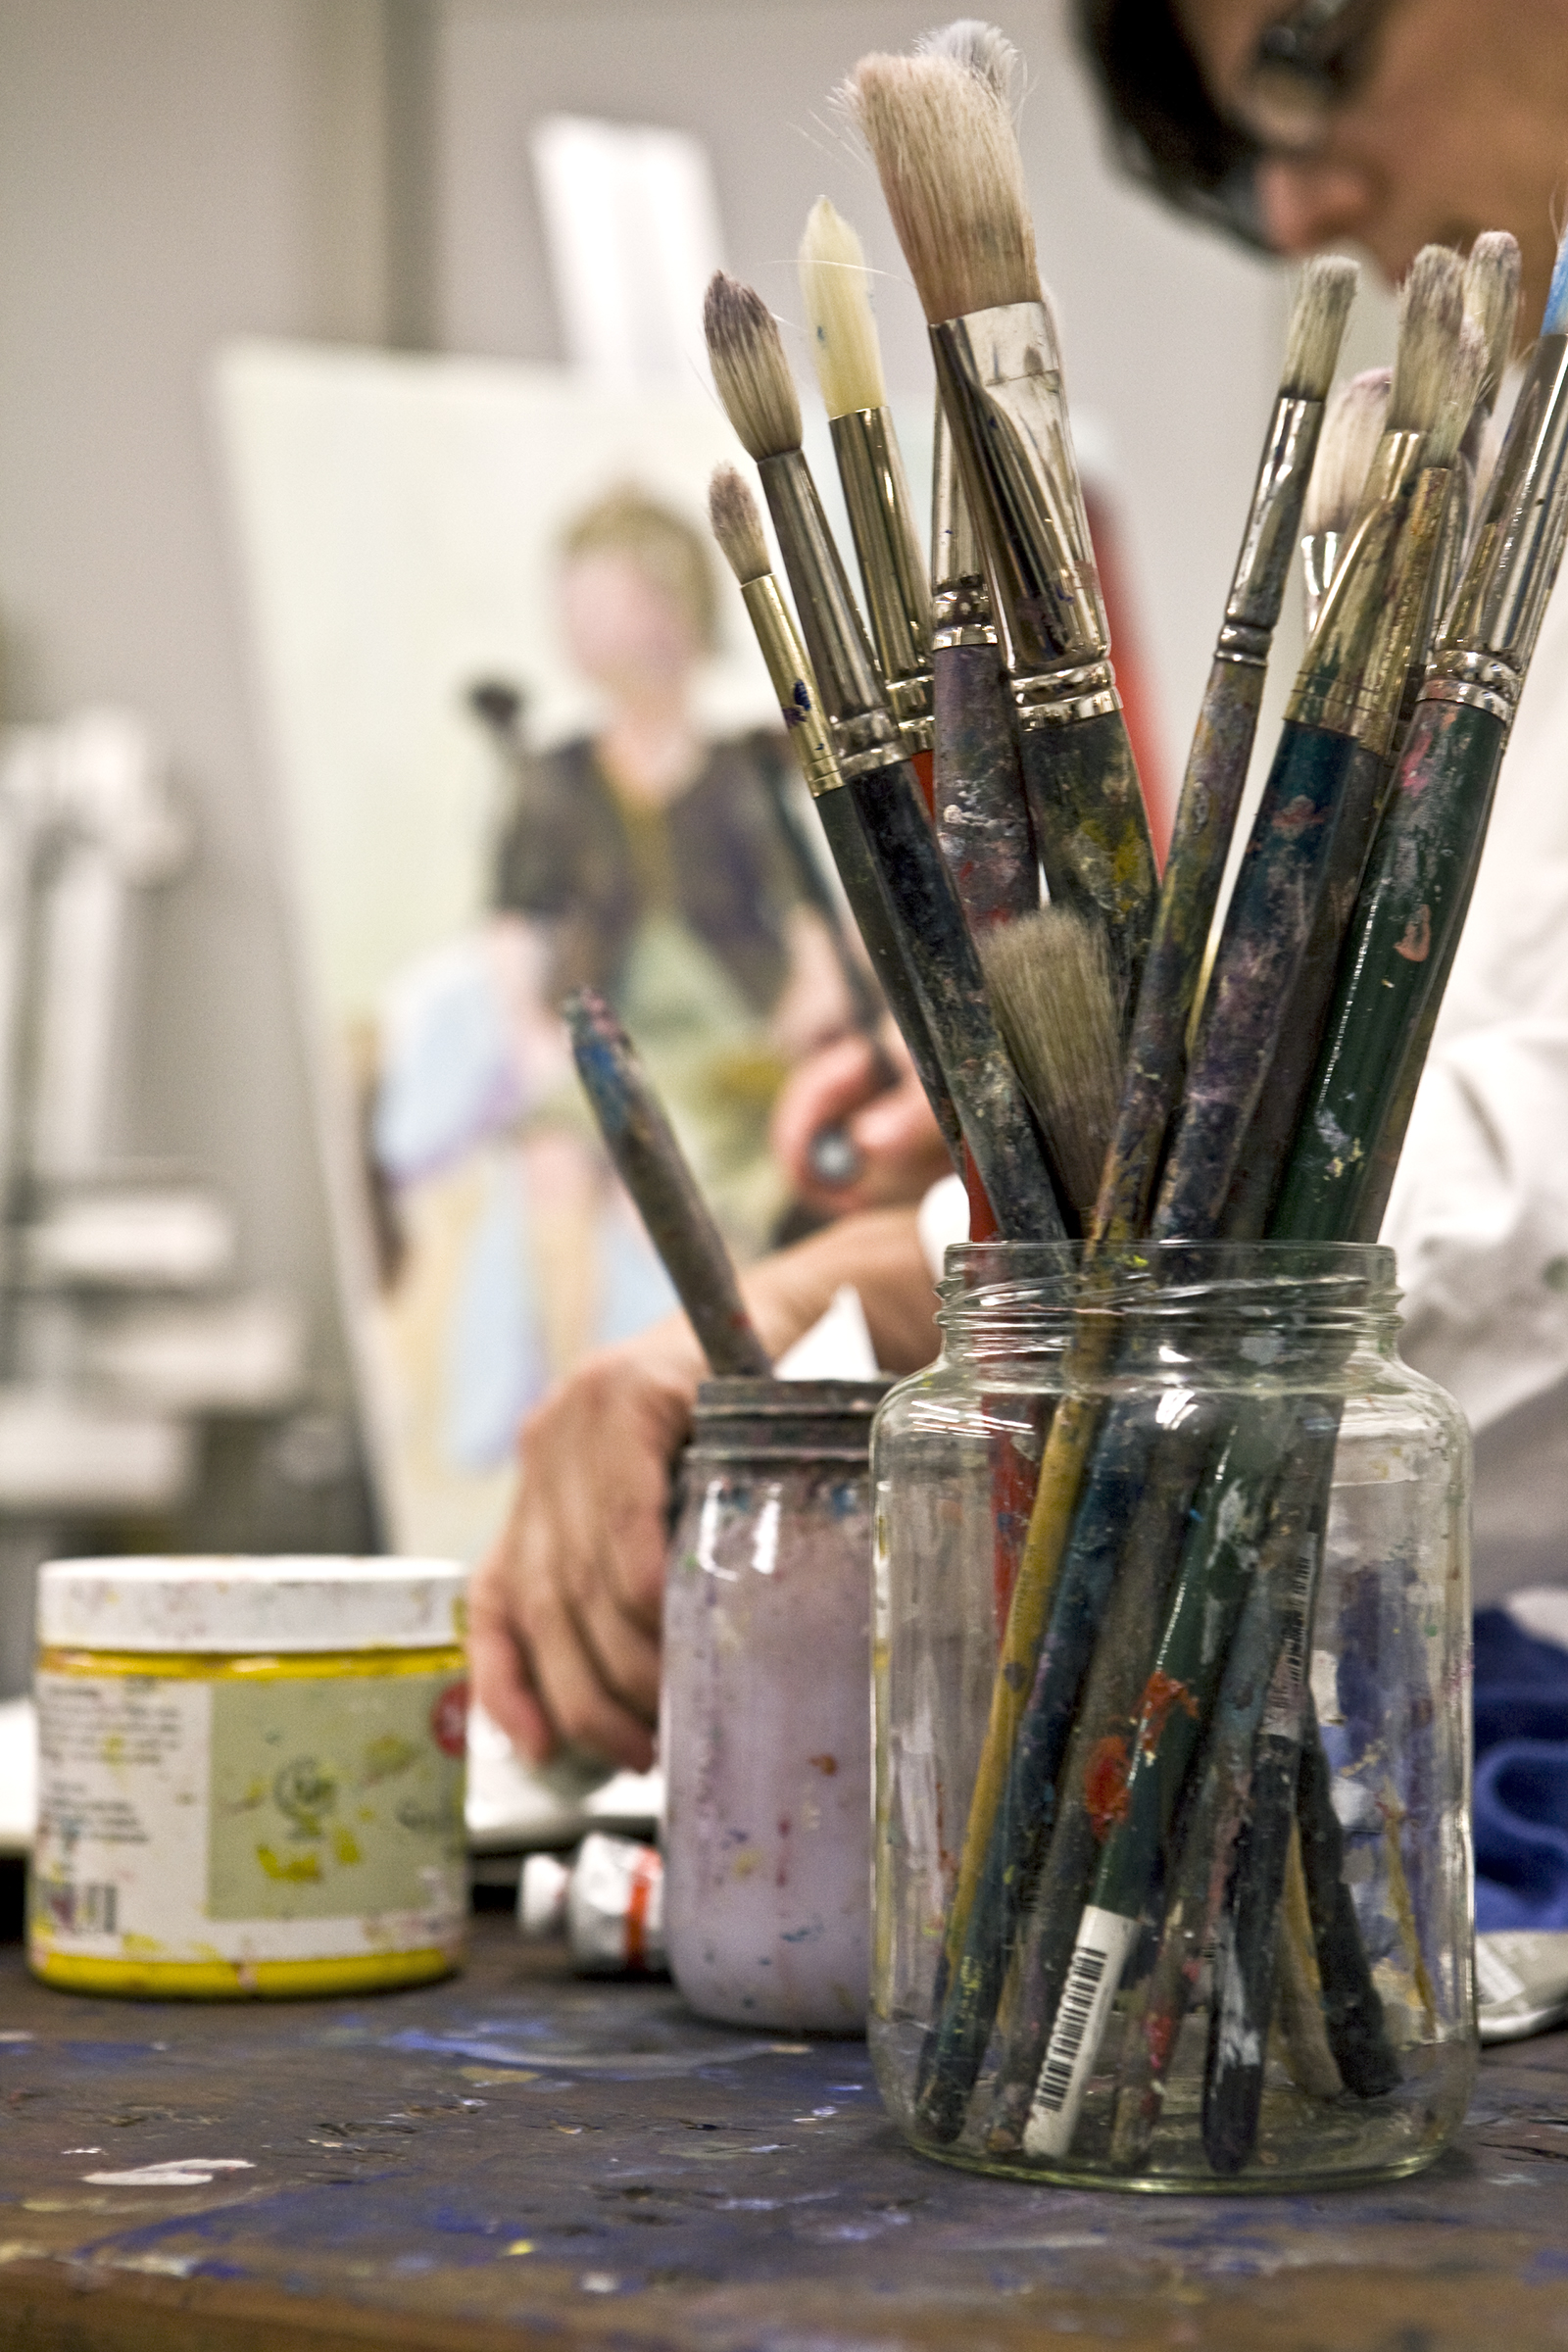 paintbrushes in a jar